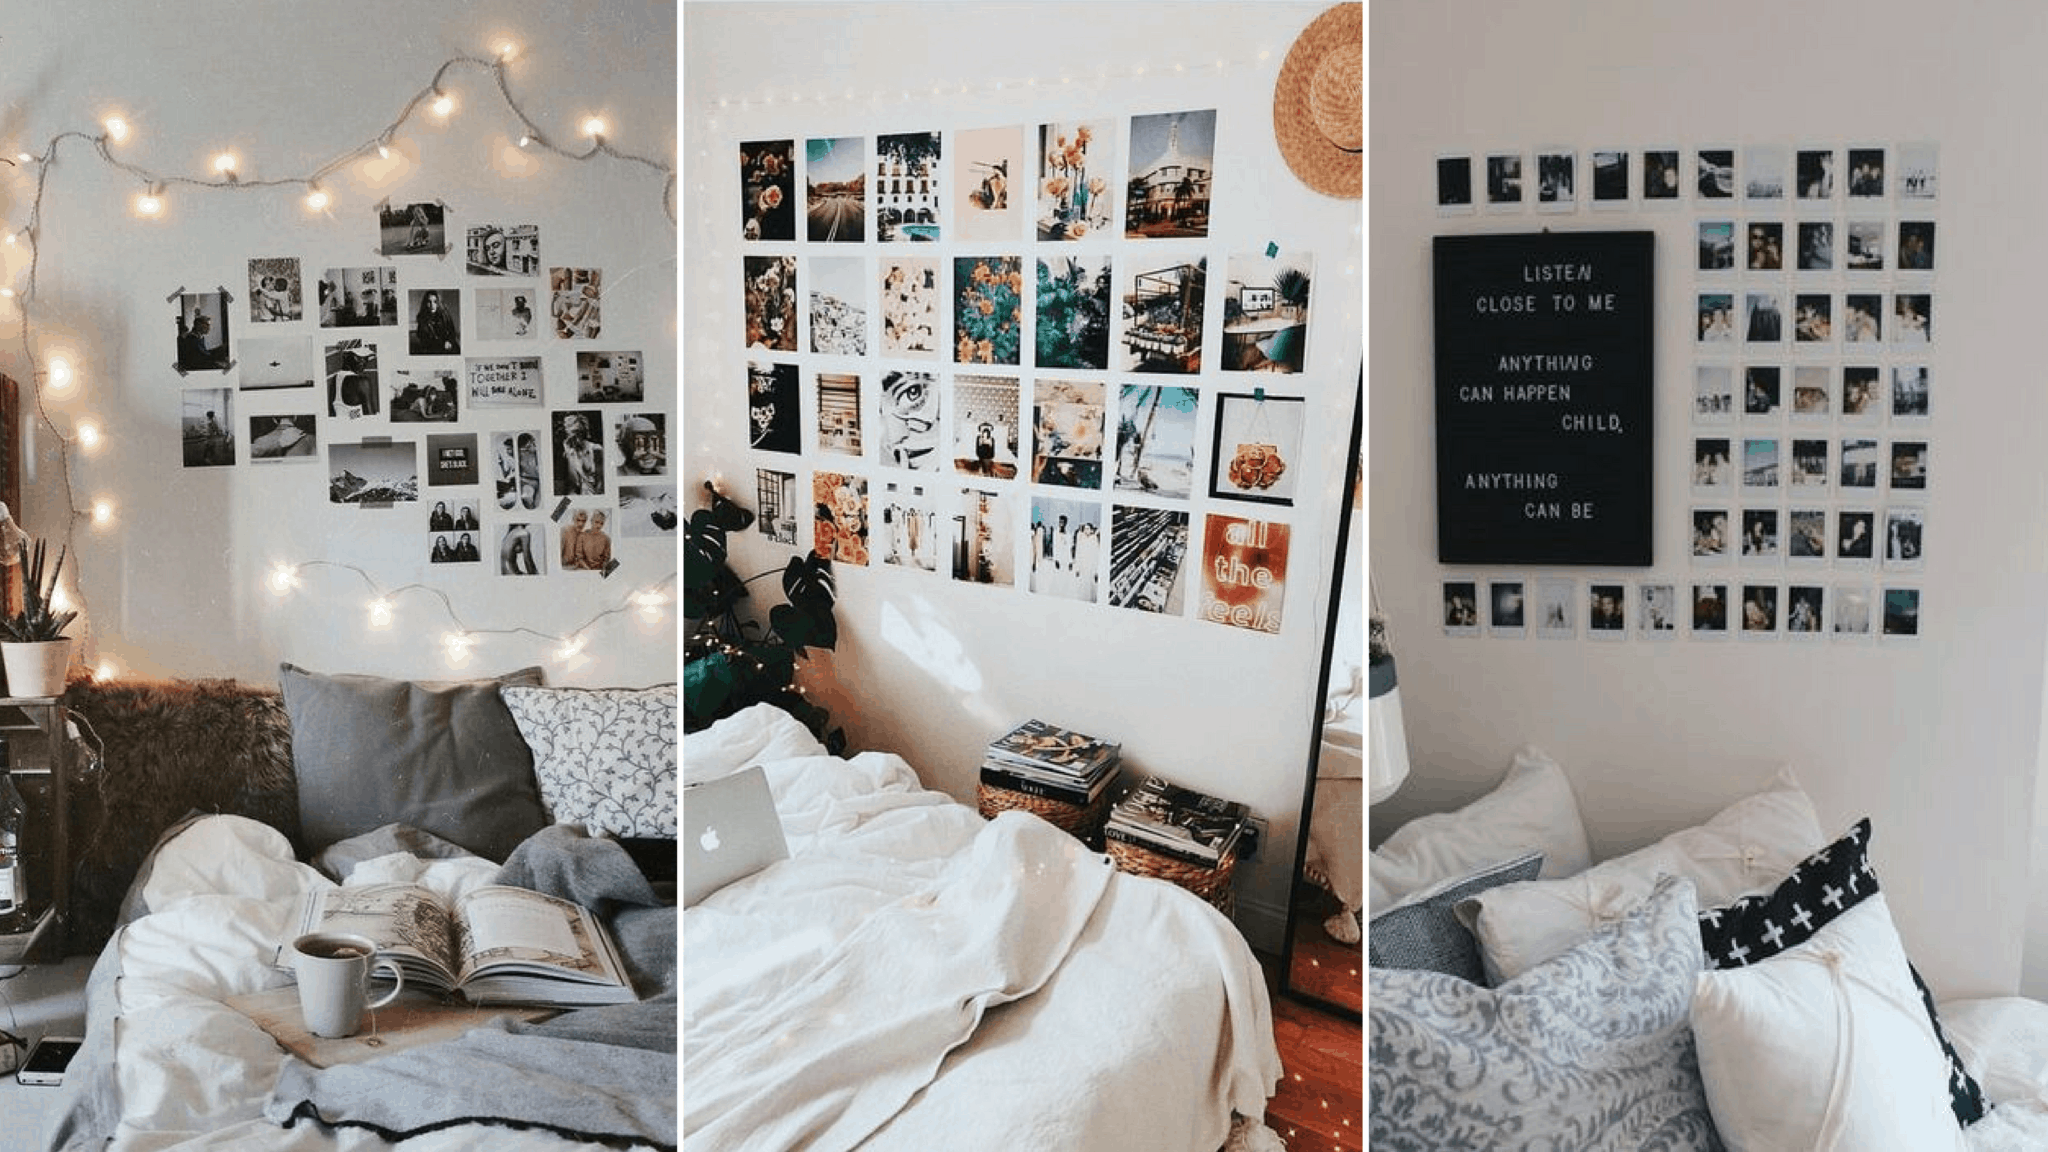 8 Cute Gallery Wall Ideas To Copy For Your College Dorm Room By Sophia Lee